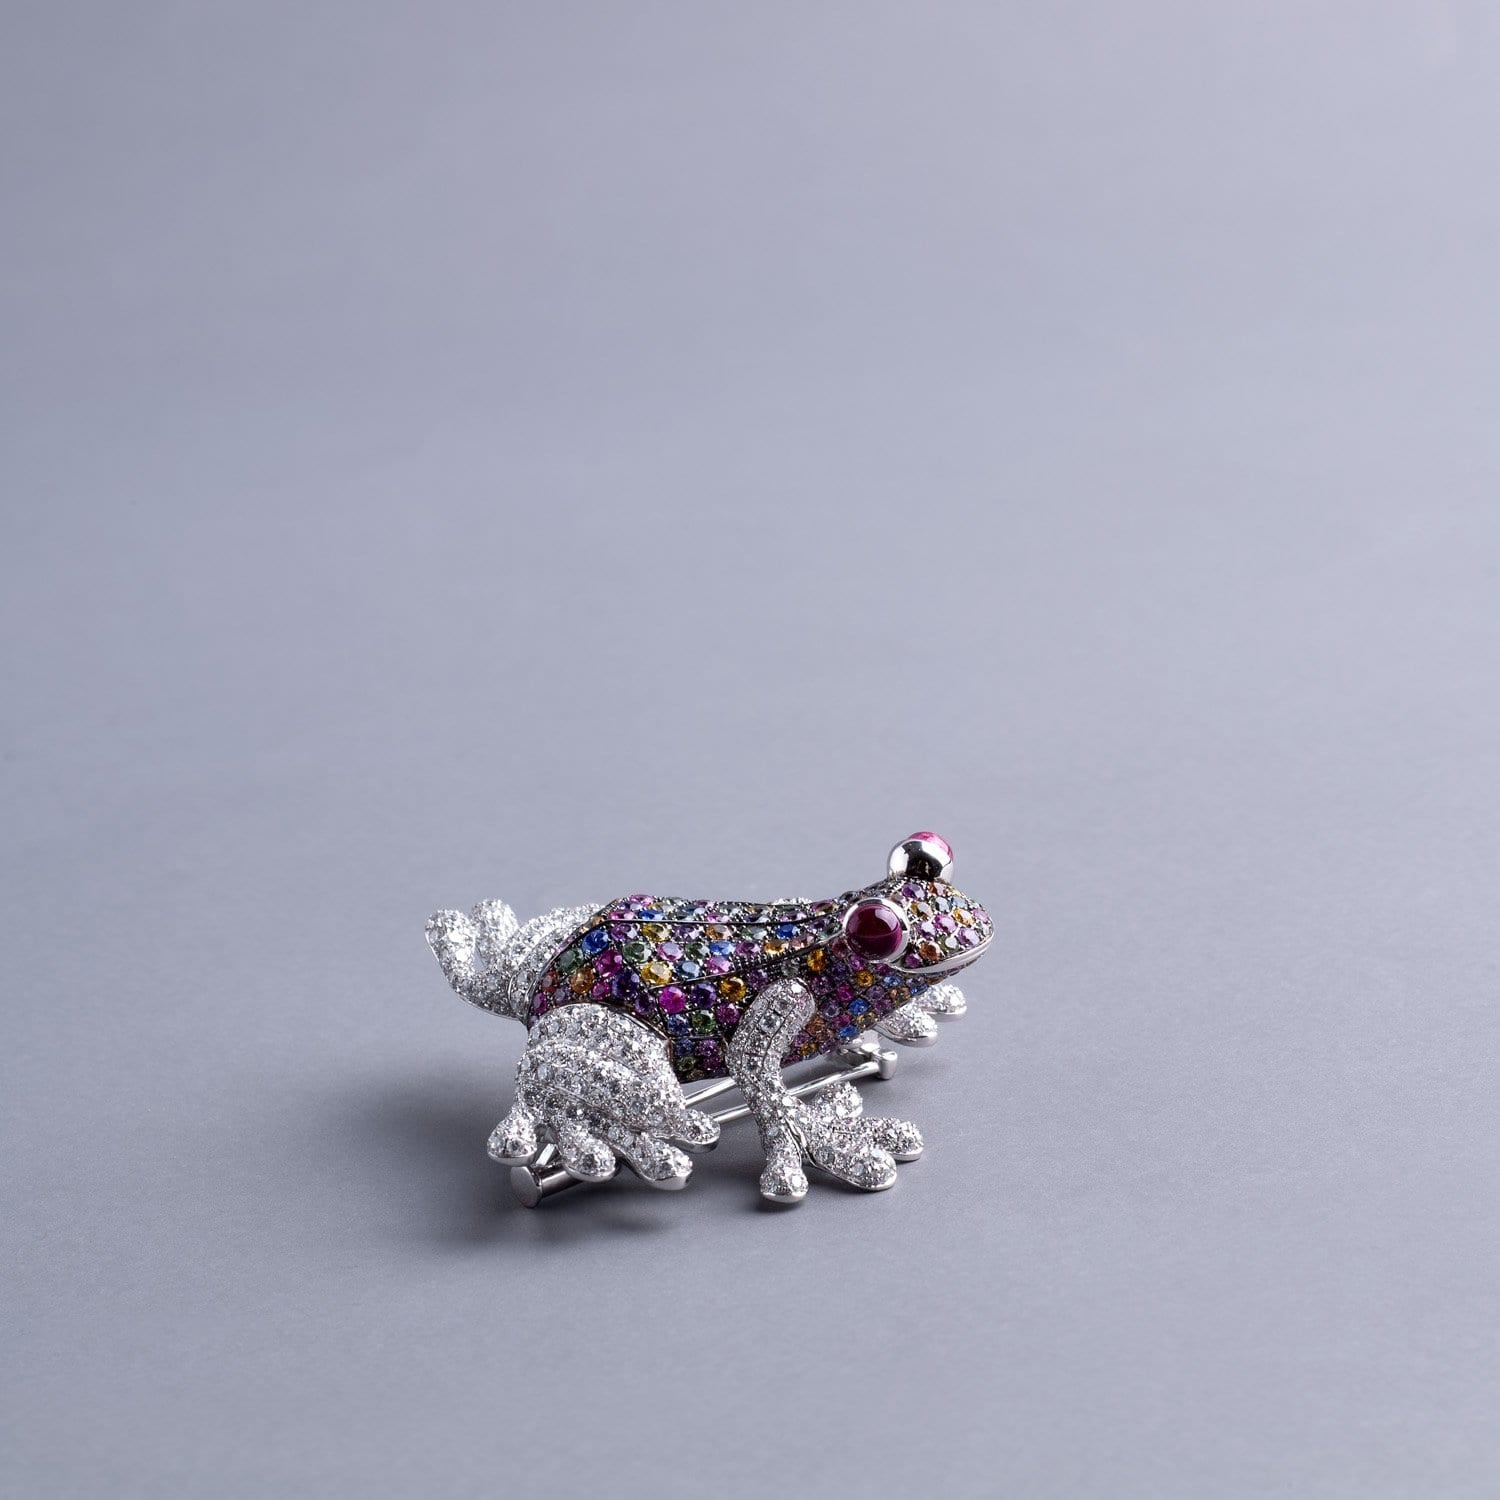 VINTAGE: Wild Life Frog, Mixed Sapphire Brooch